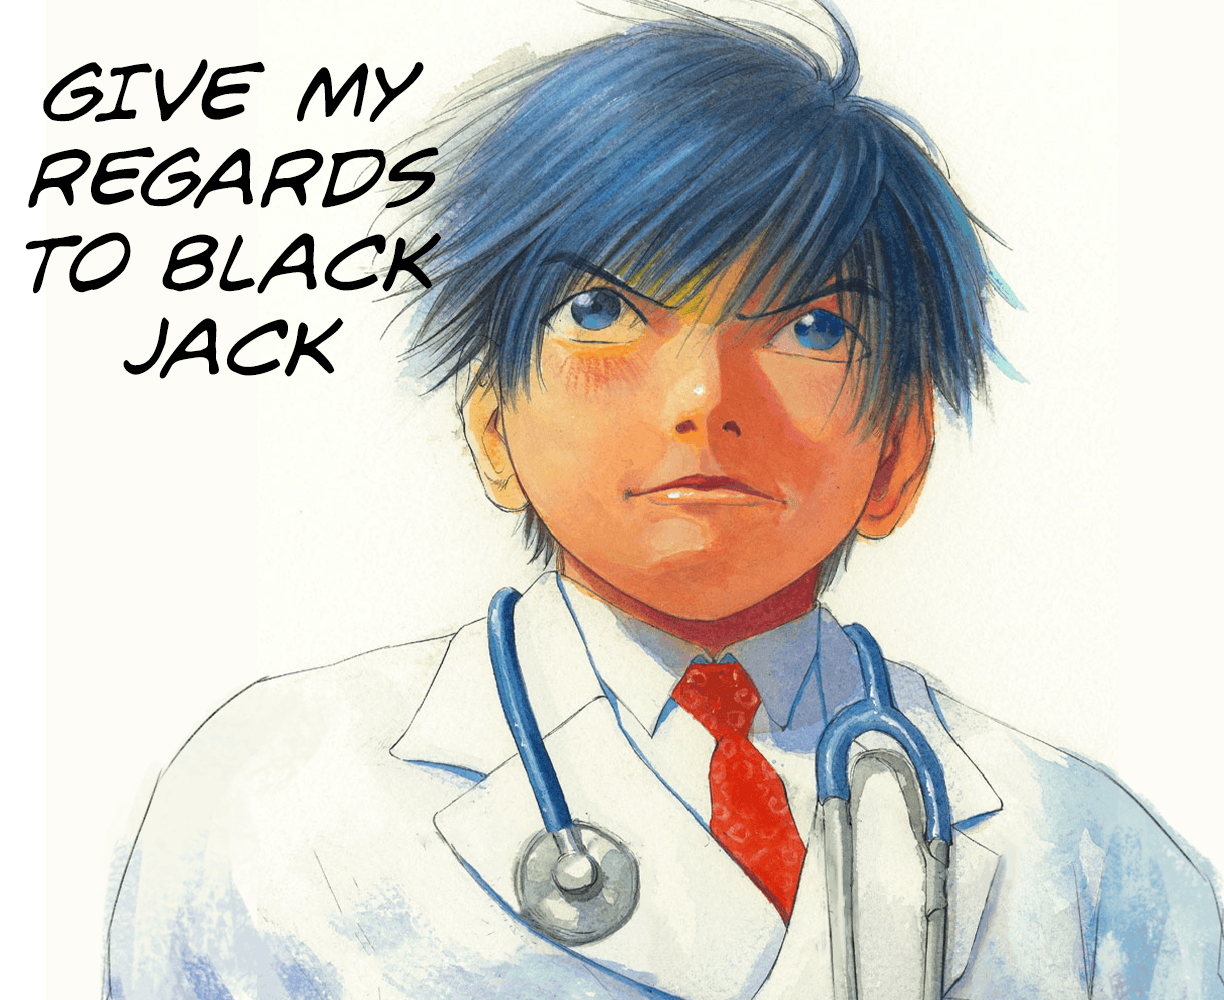 The cover art for the episode 100% Successful from the comics series Give My Regards to Black Jack, which is number 48 in the series